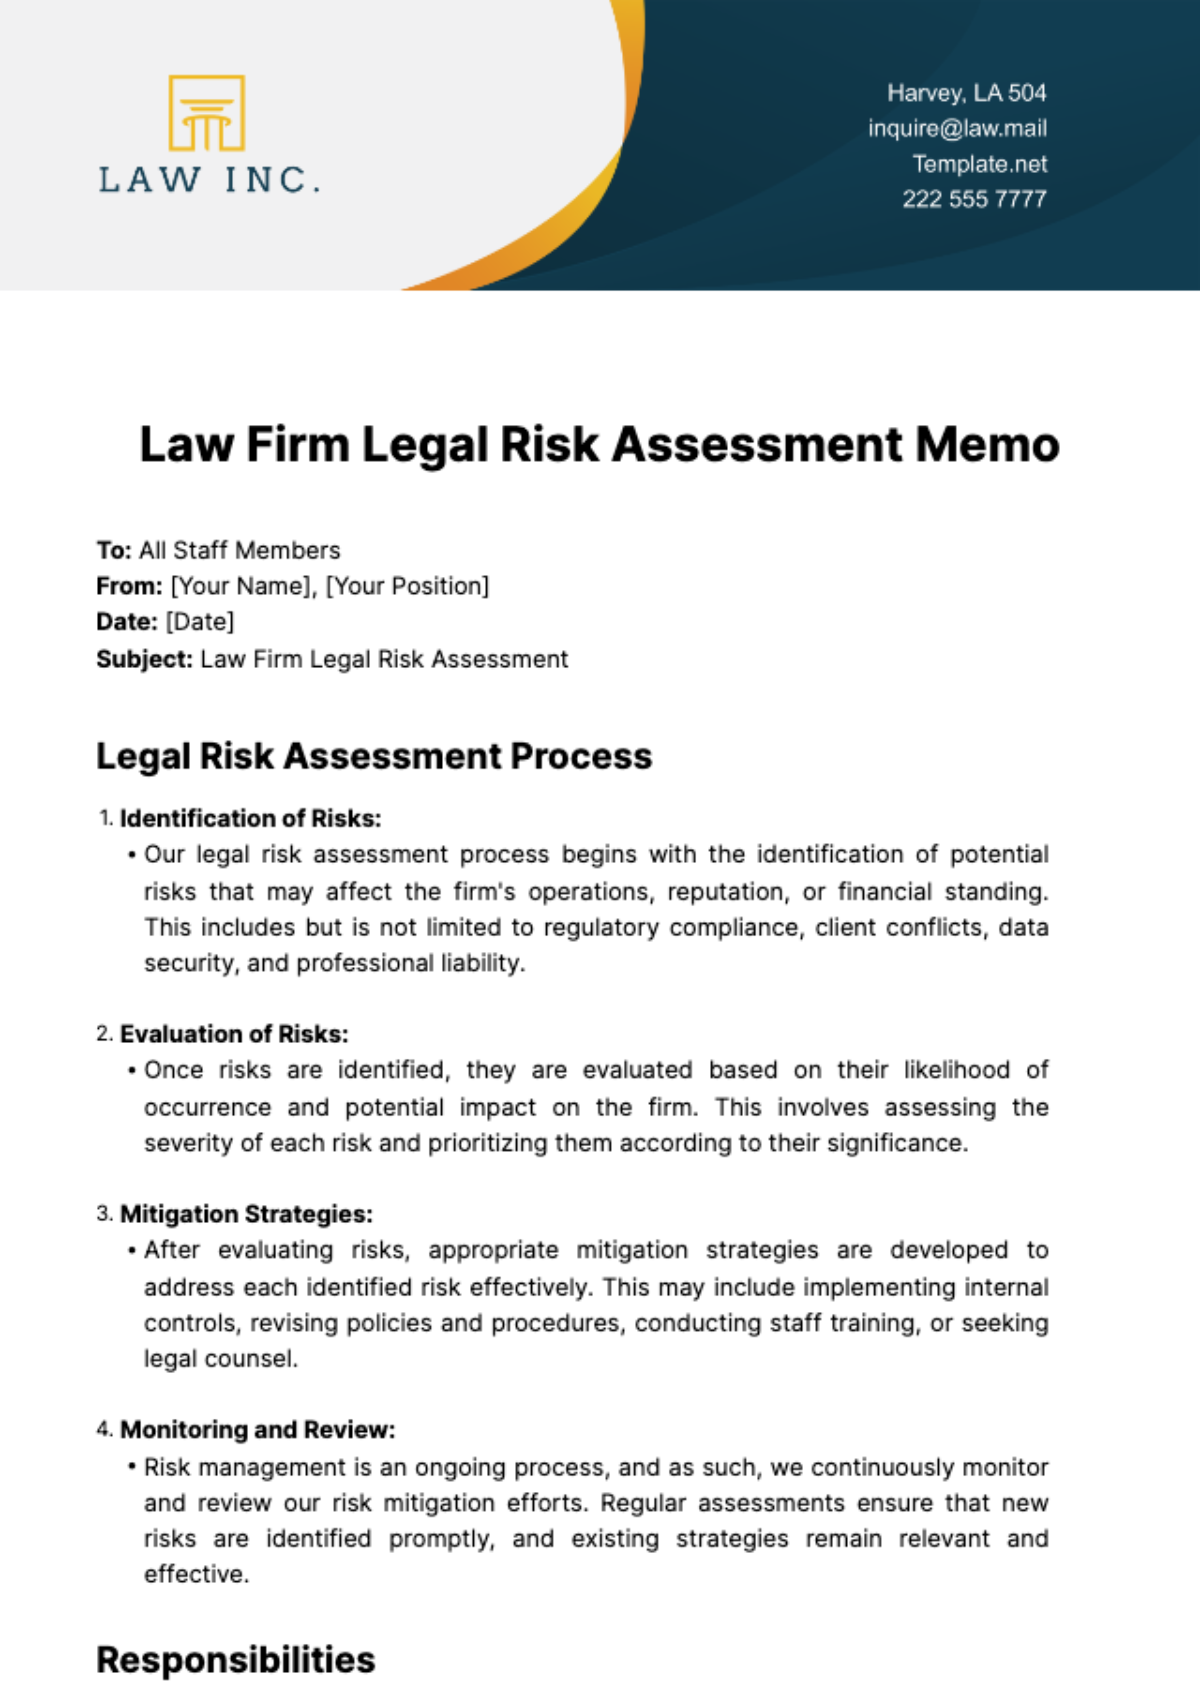 Law Firm Legal Risk Assessment Memo Template